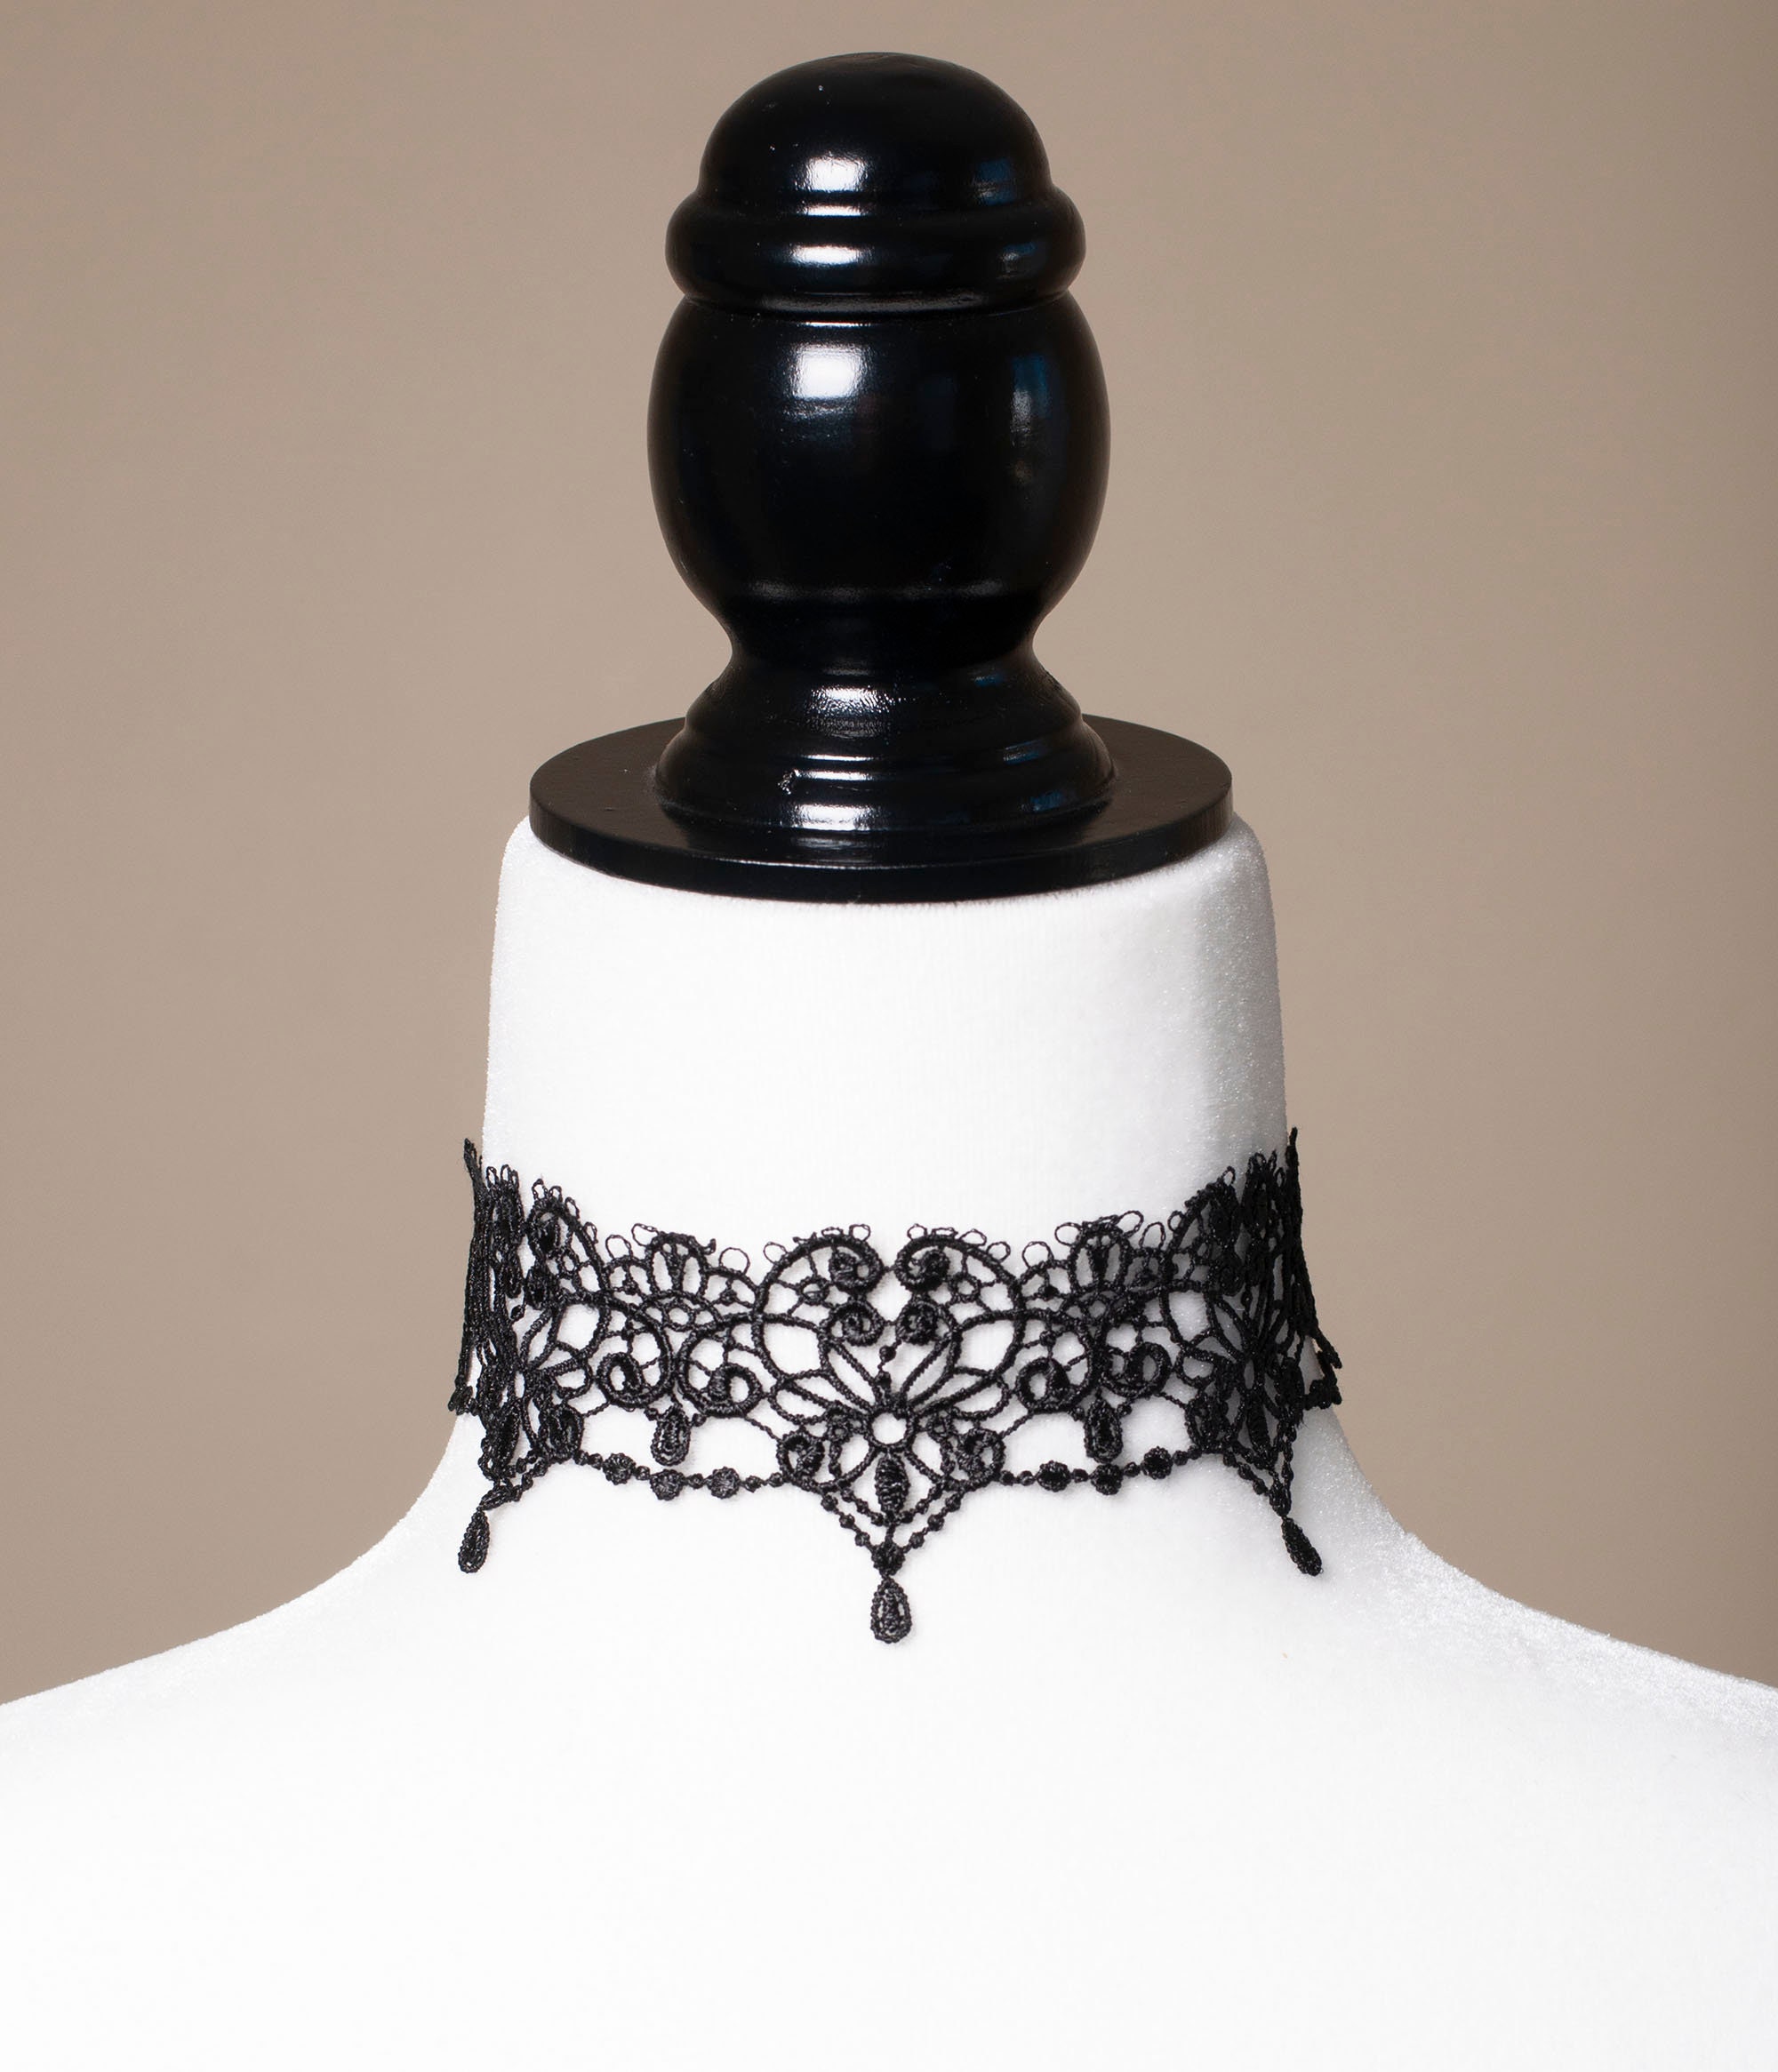 Wide Black Lace Choker Crochet Necklace with Adjustable Clasp Gothic Jewelry